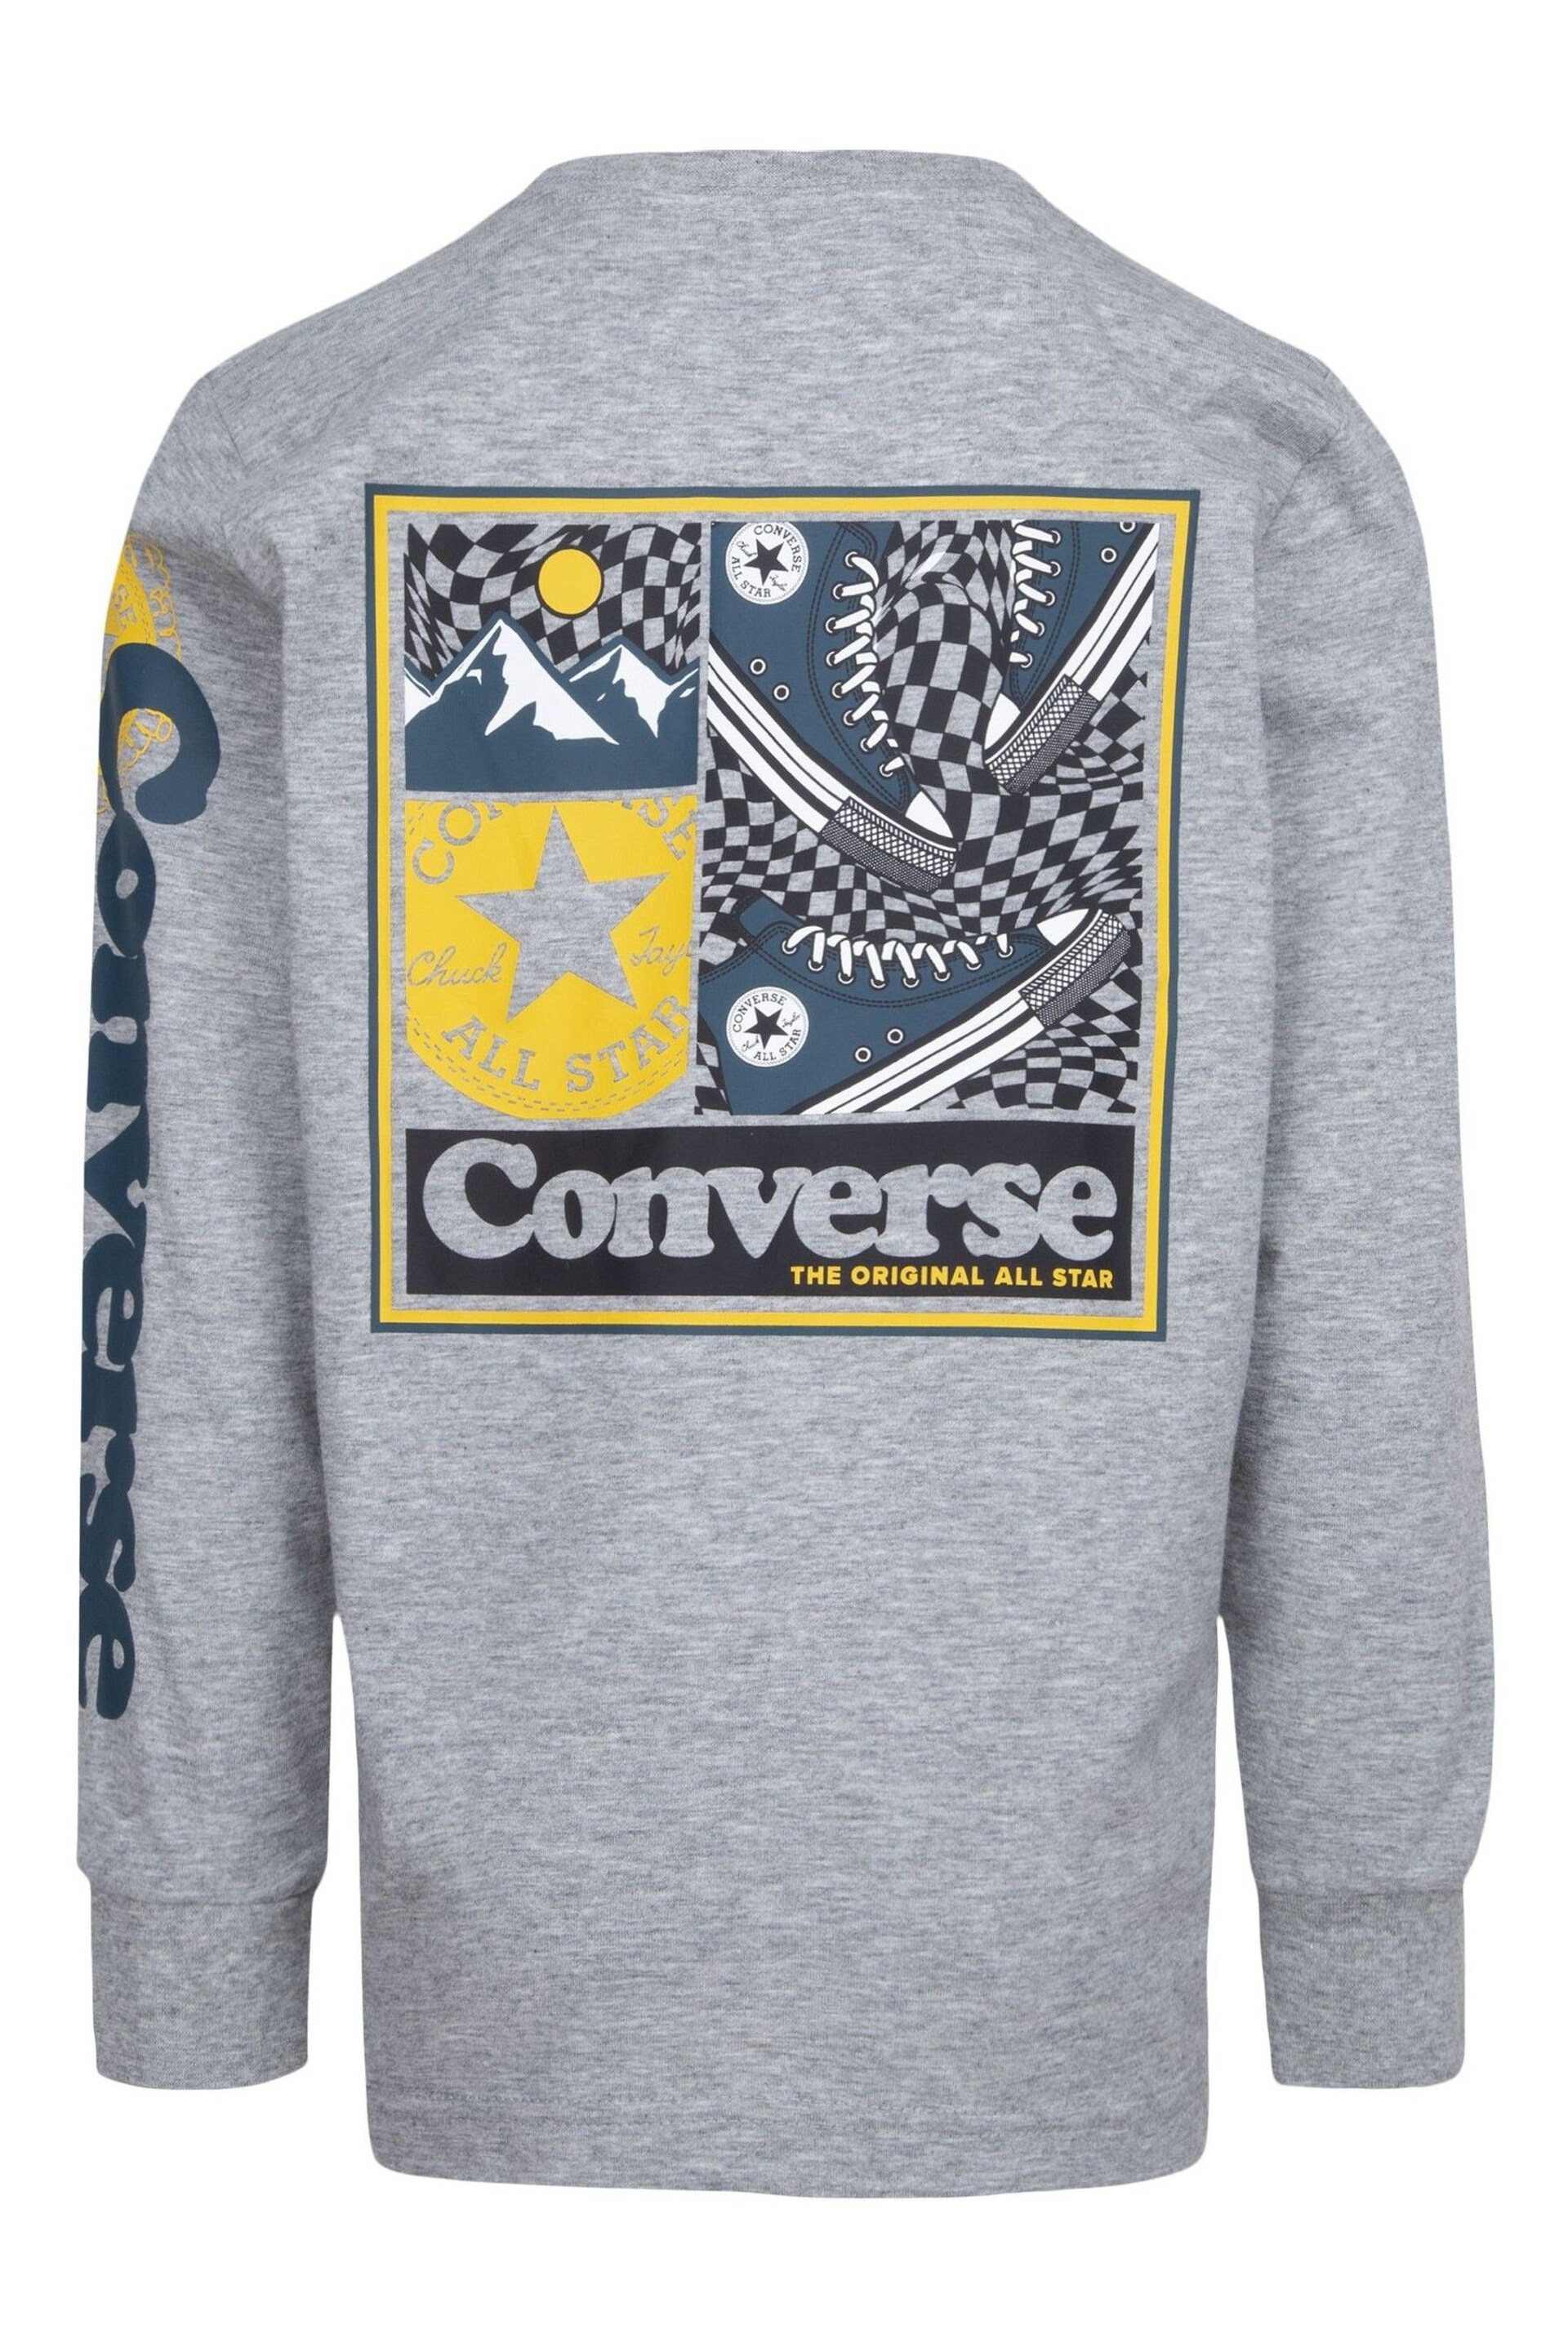 Converse Grey Graphic Little Kids Long Sleeve T-Shirt - Image 6 of 9